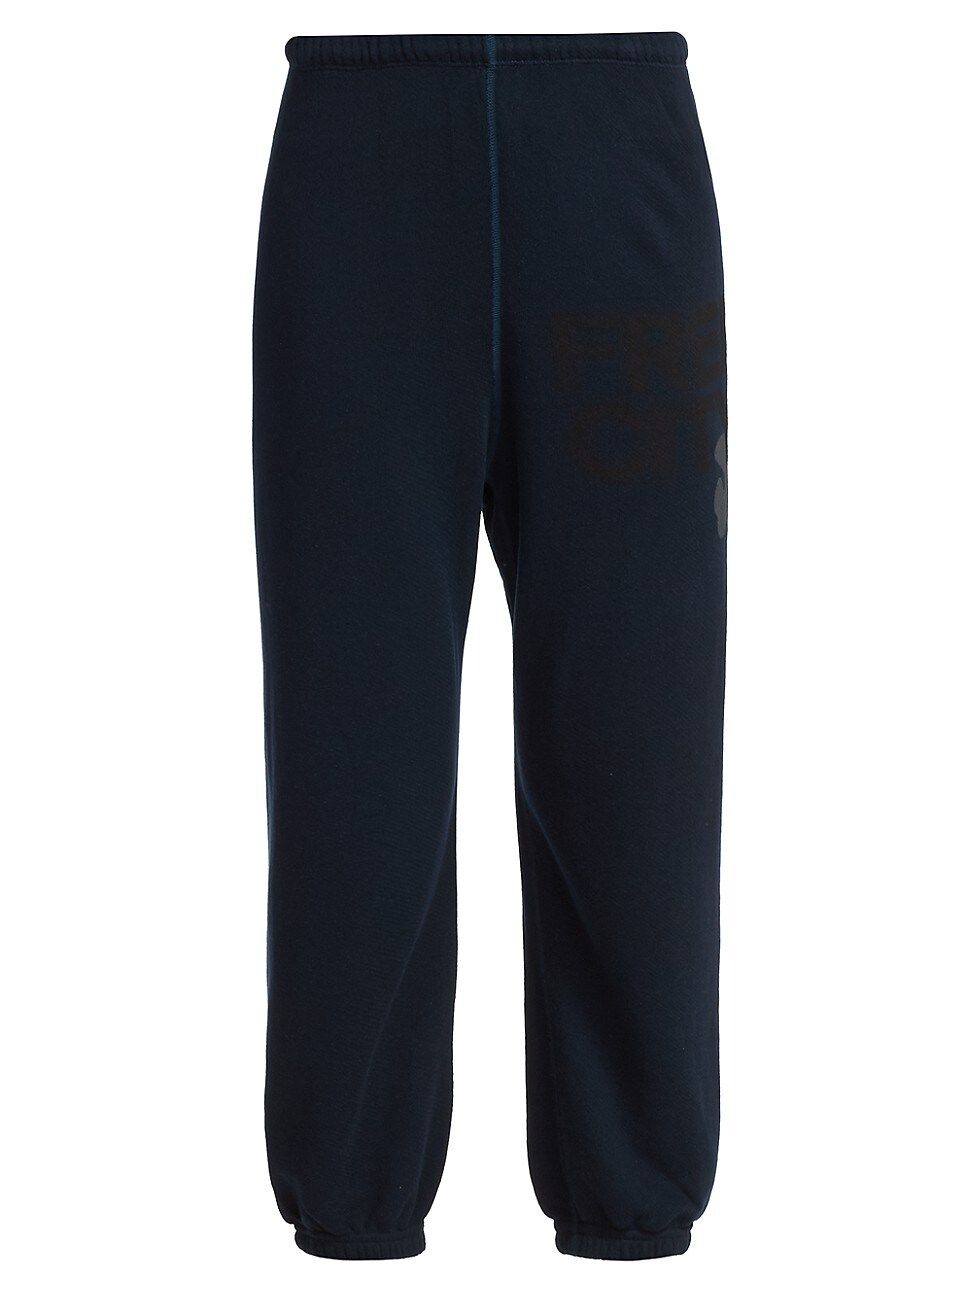 Free City Women's Superluff Lux Standard-Fit Sweatpants - Squids Ink - Size Small | Saks Fifth Avenue